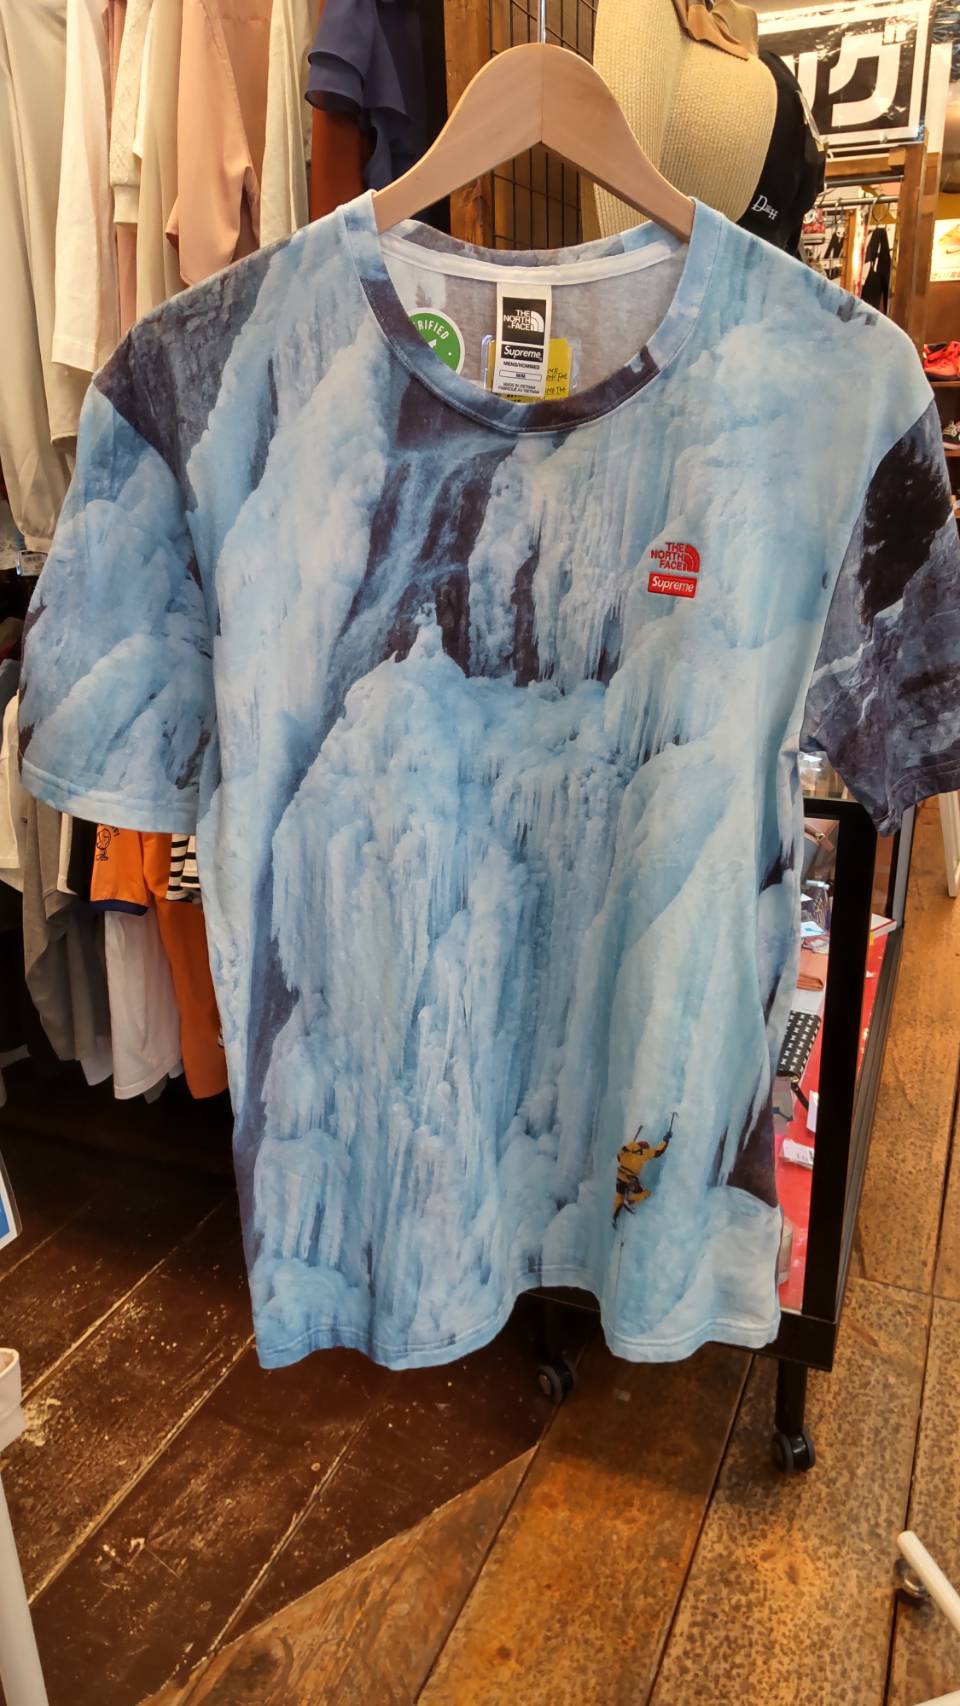 Supreme The North Face Ice Climb Tee www.krzysztofbialy.com